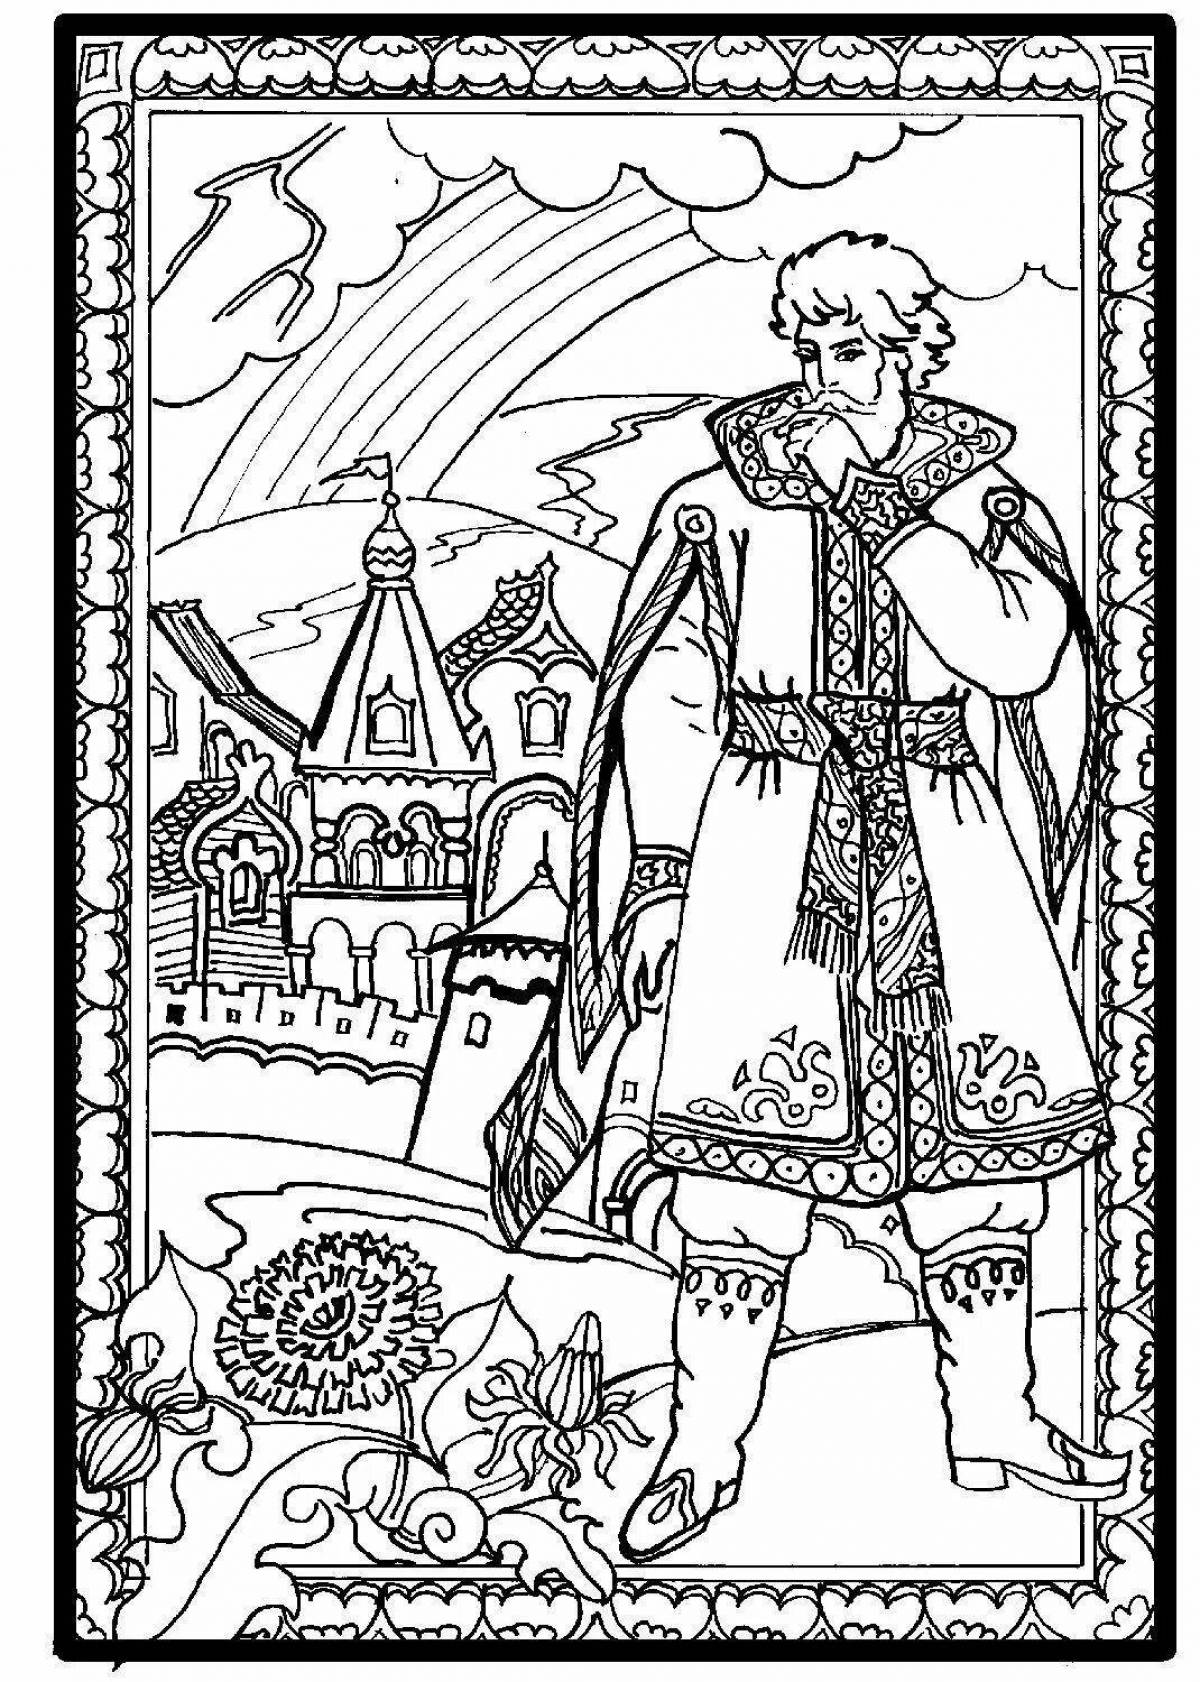 Coloring page exalted sadko and king of the sea